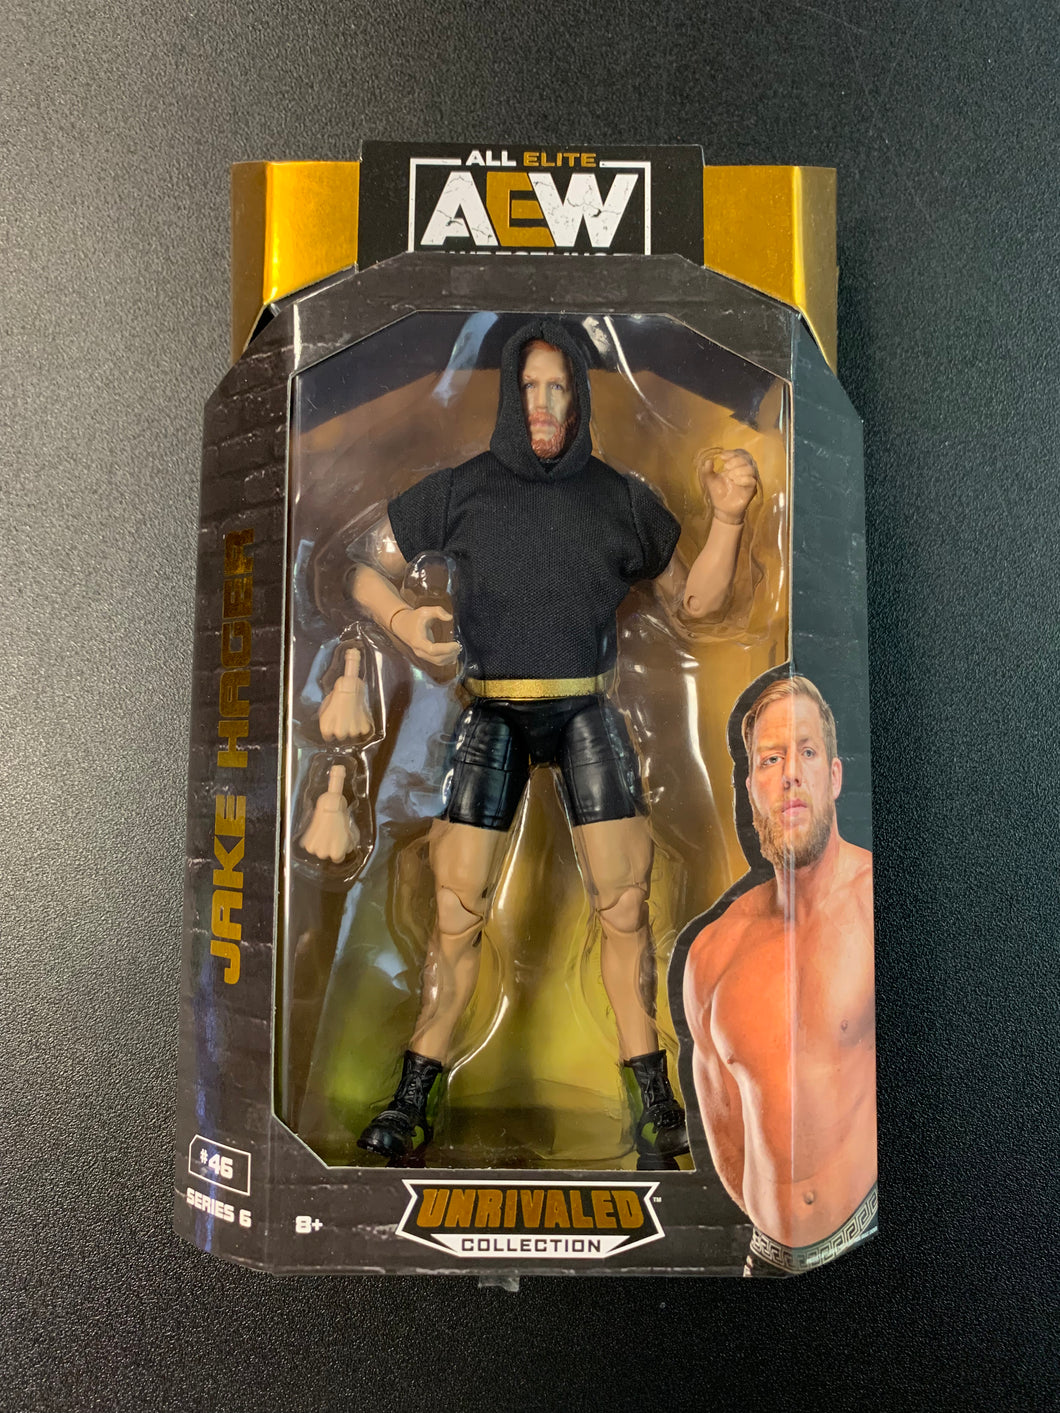 AEW UNRIVALED COLLECTION JAKE HAGER #46 SERIES 6